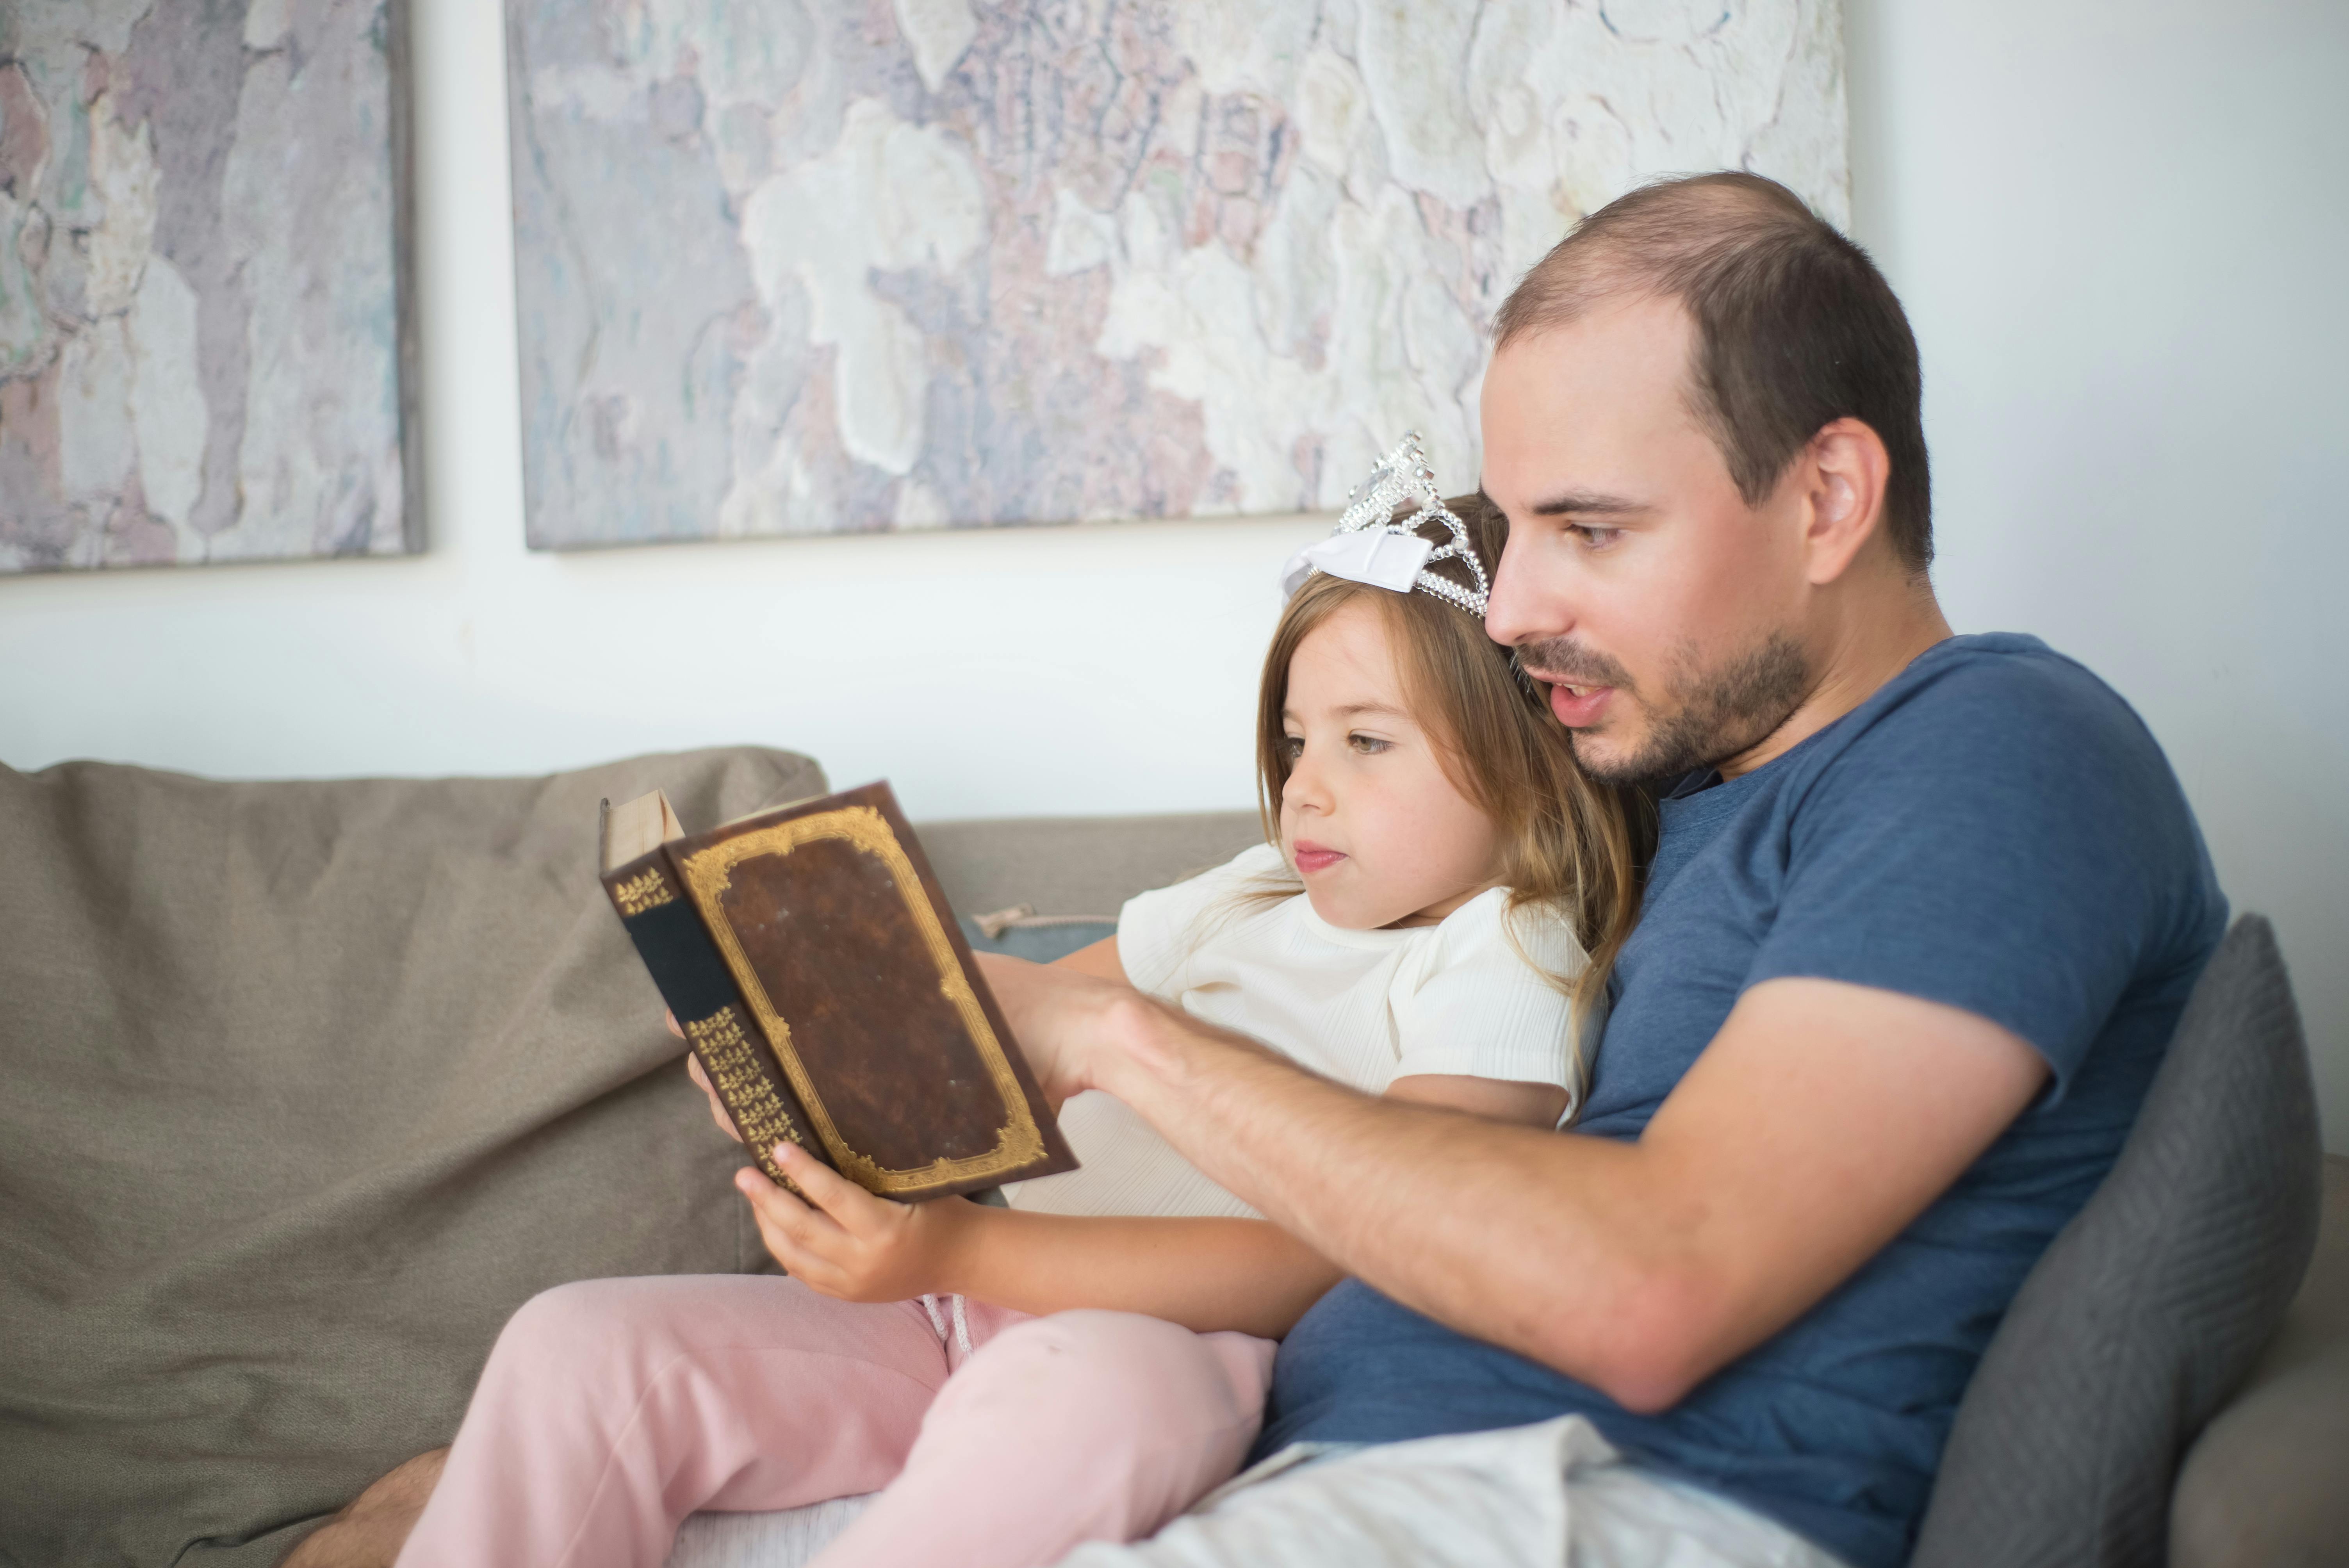 Father and daughter reading together | Source: Pexels